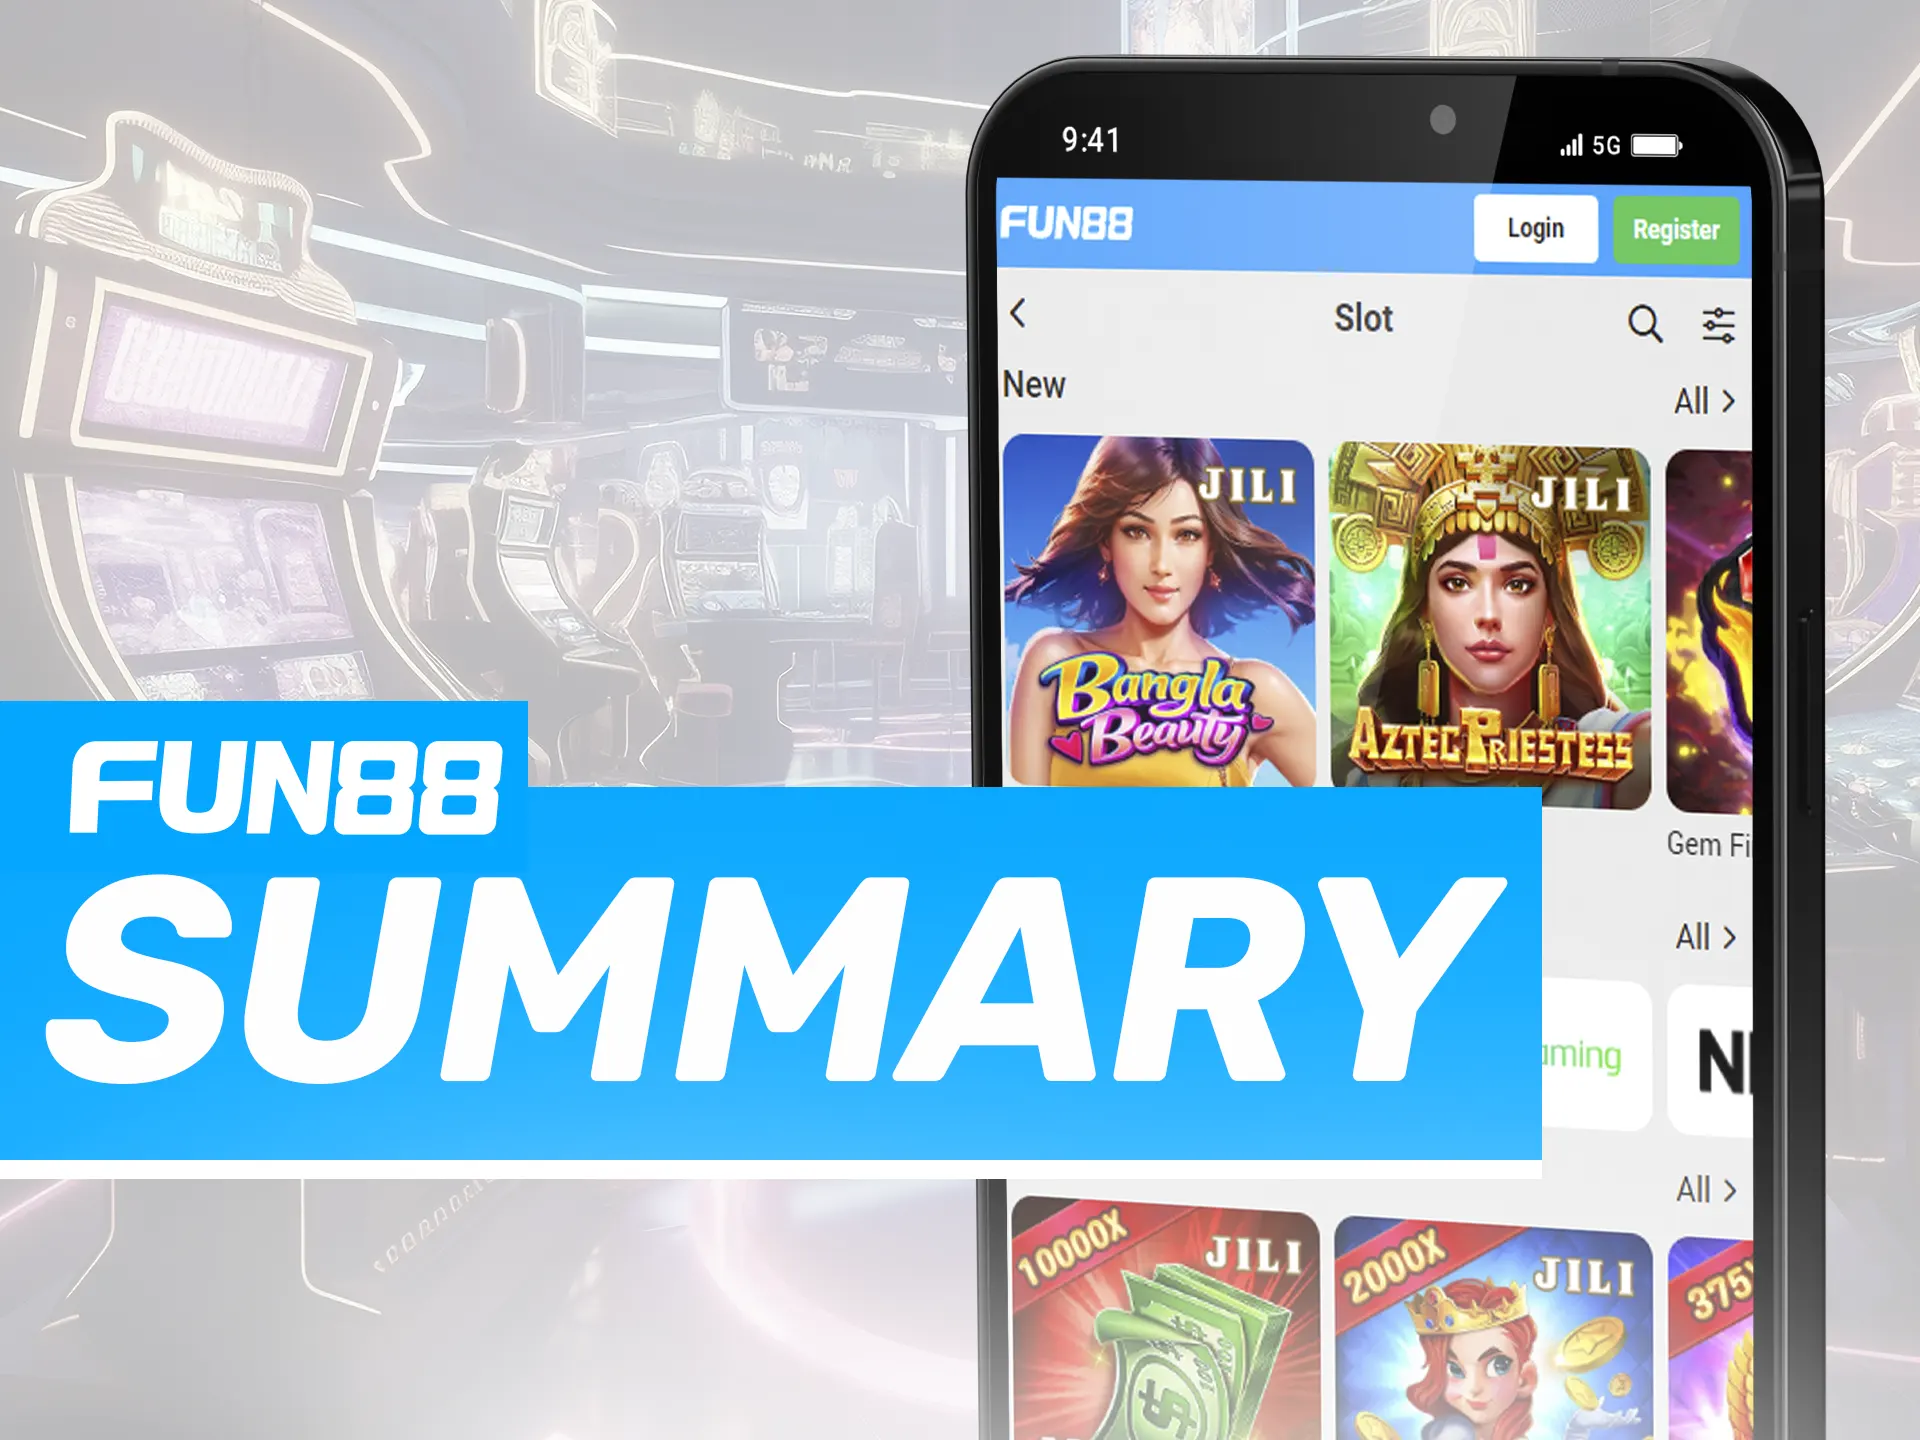 The Fun88 app offers stable performance, diverse gaming options, and reliable support for players.